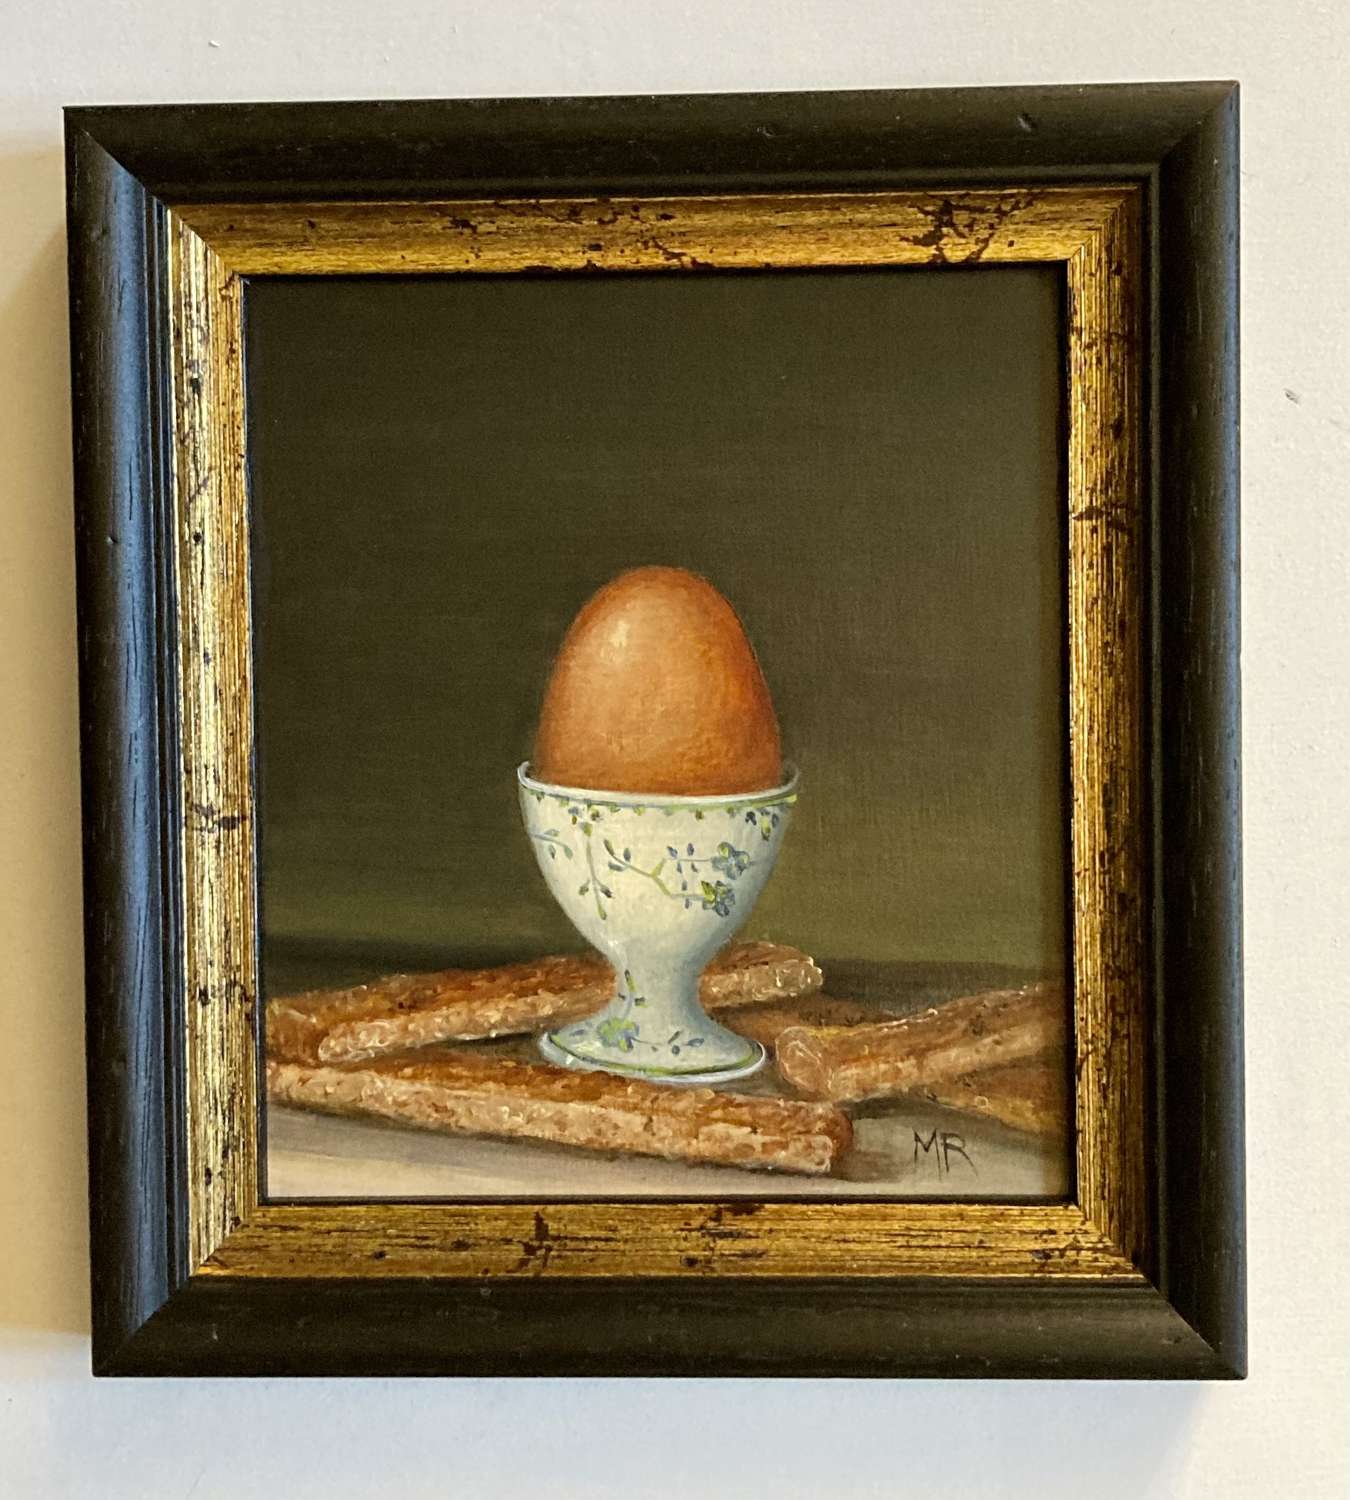 Boiled egg and soldiers